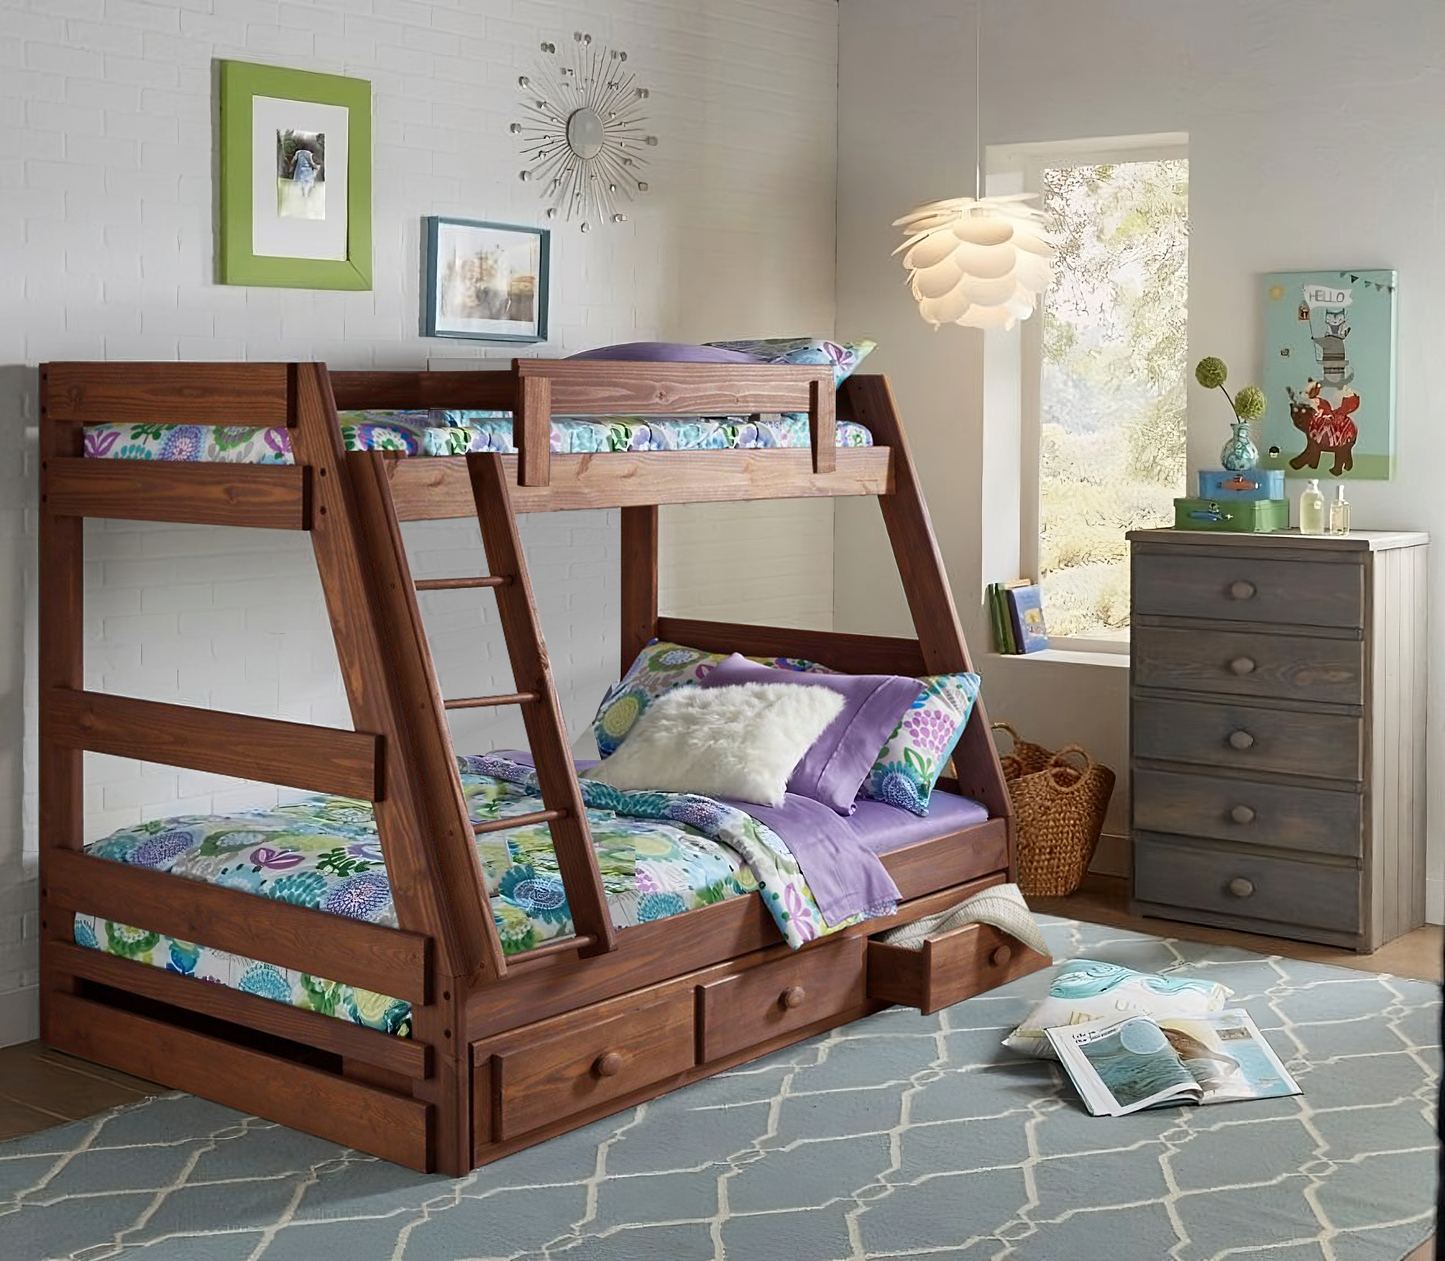 609 BUNKBED WOODEN TWIN/FULL STORAGE Simply Bunkbed